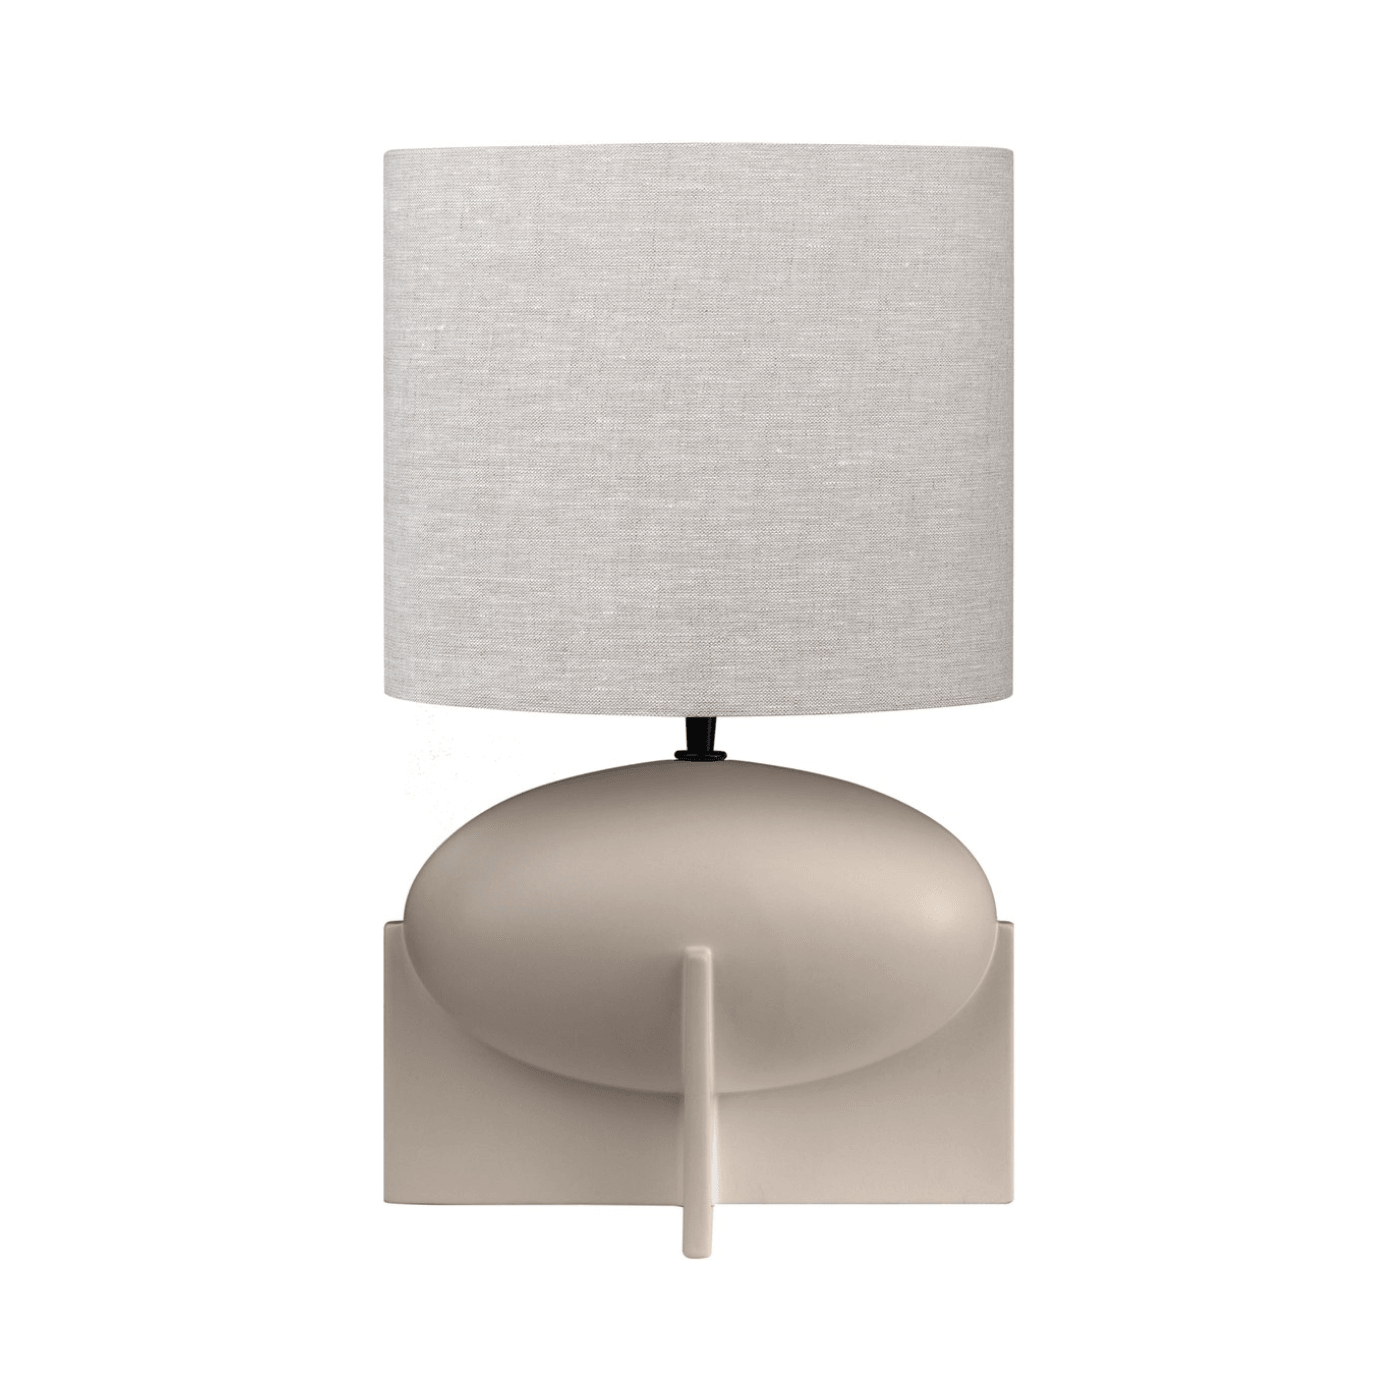 OVO 1 Earthenware Table Lamp with Shade - Maison Rêves UK